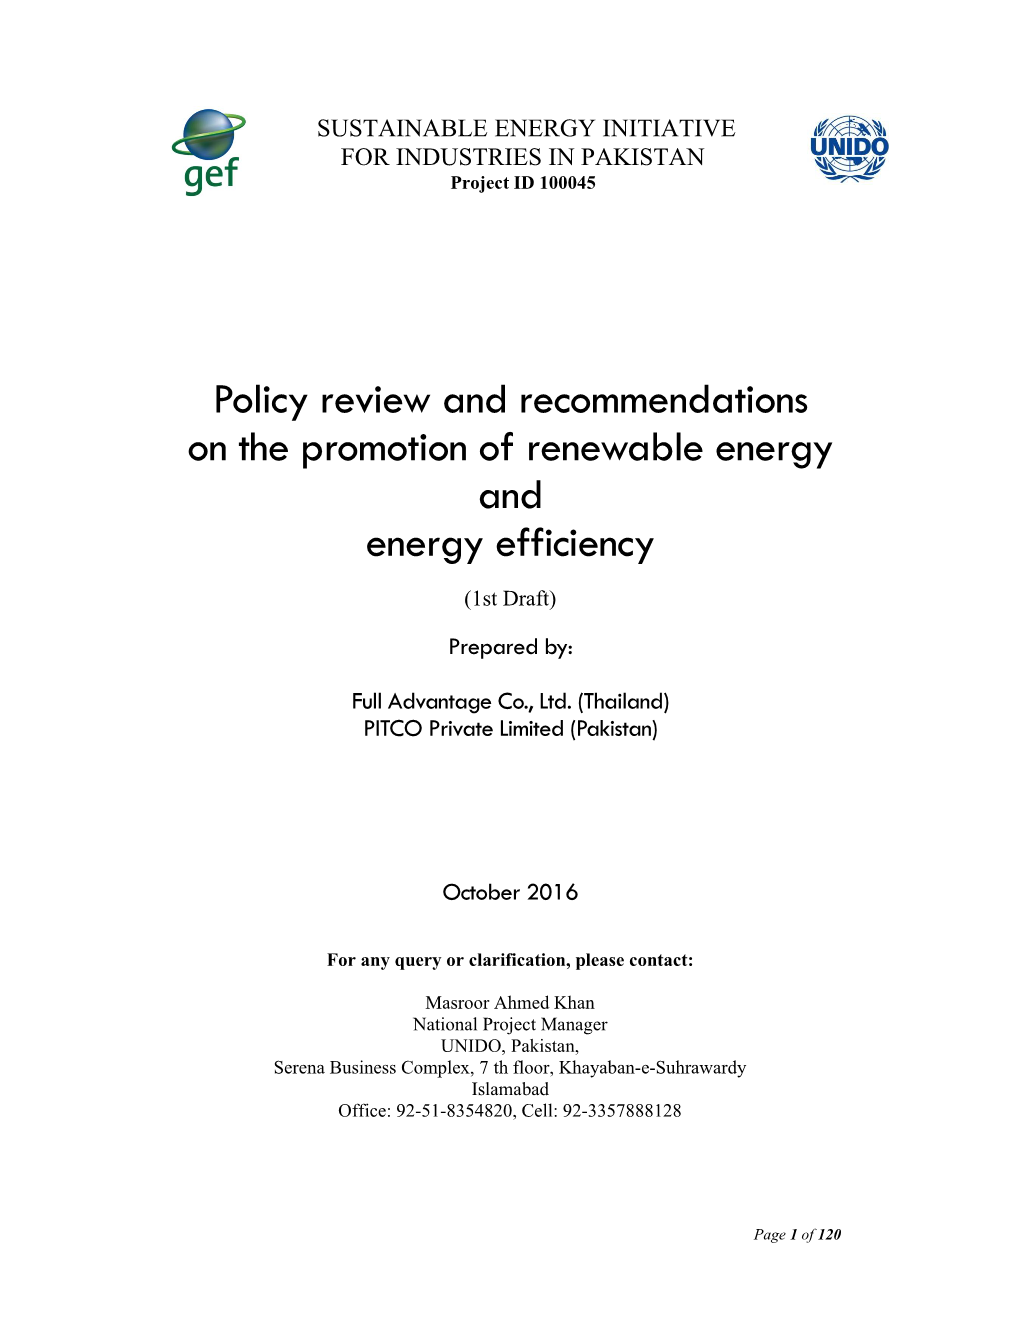 Policy Review and Recommendations on the Promotion of Renewable Energy and Energy Efficiency